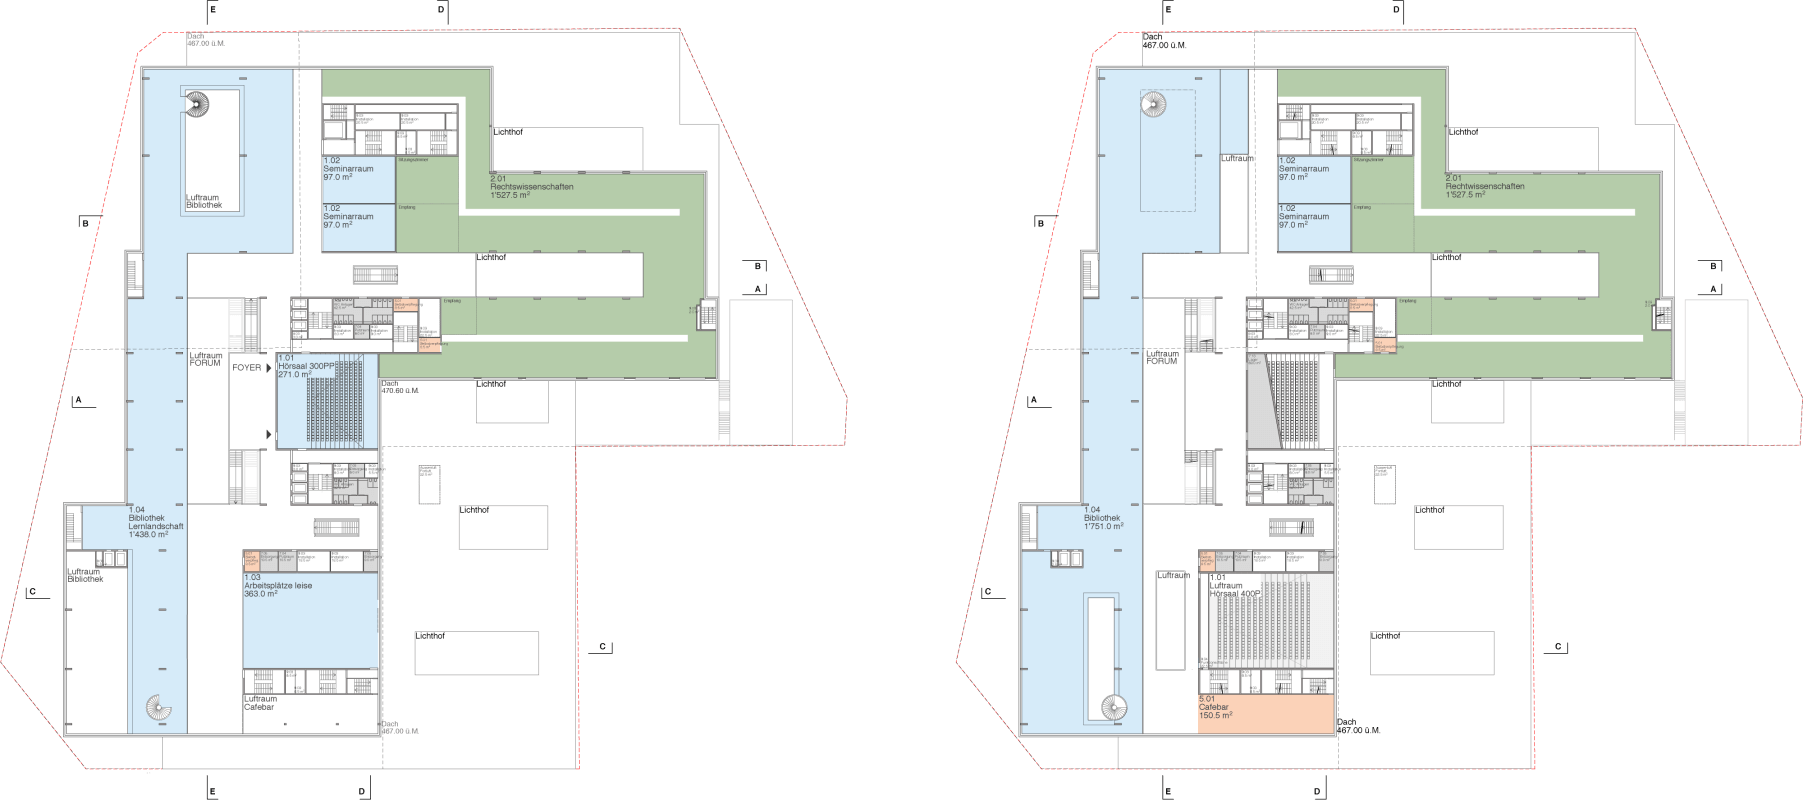 Forum Uni ZH. Upper floor plans, 5th and 6th floor, scale 1:500. (6-5OG)